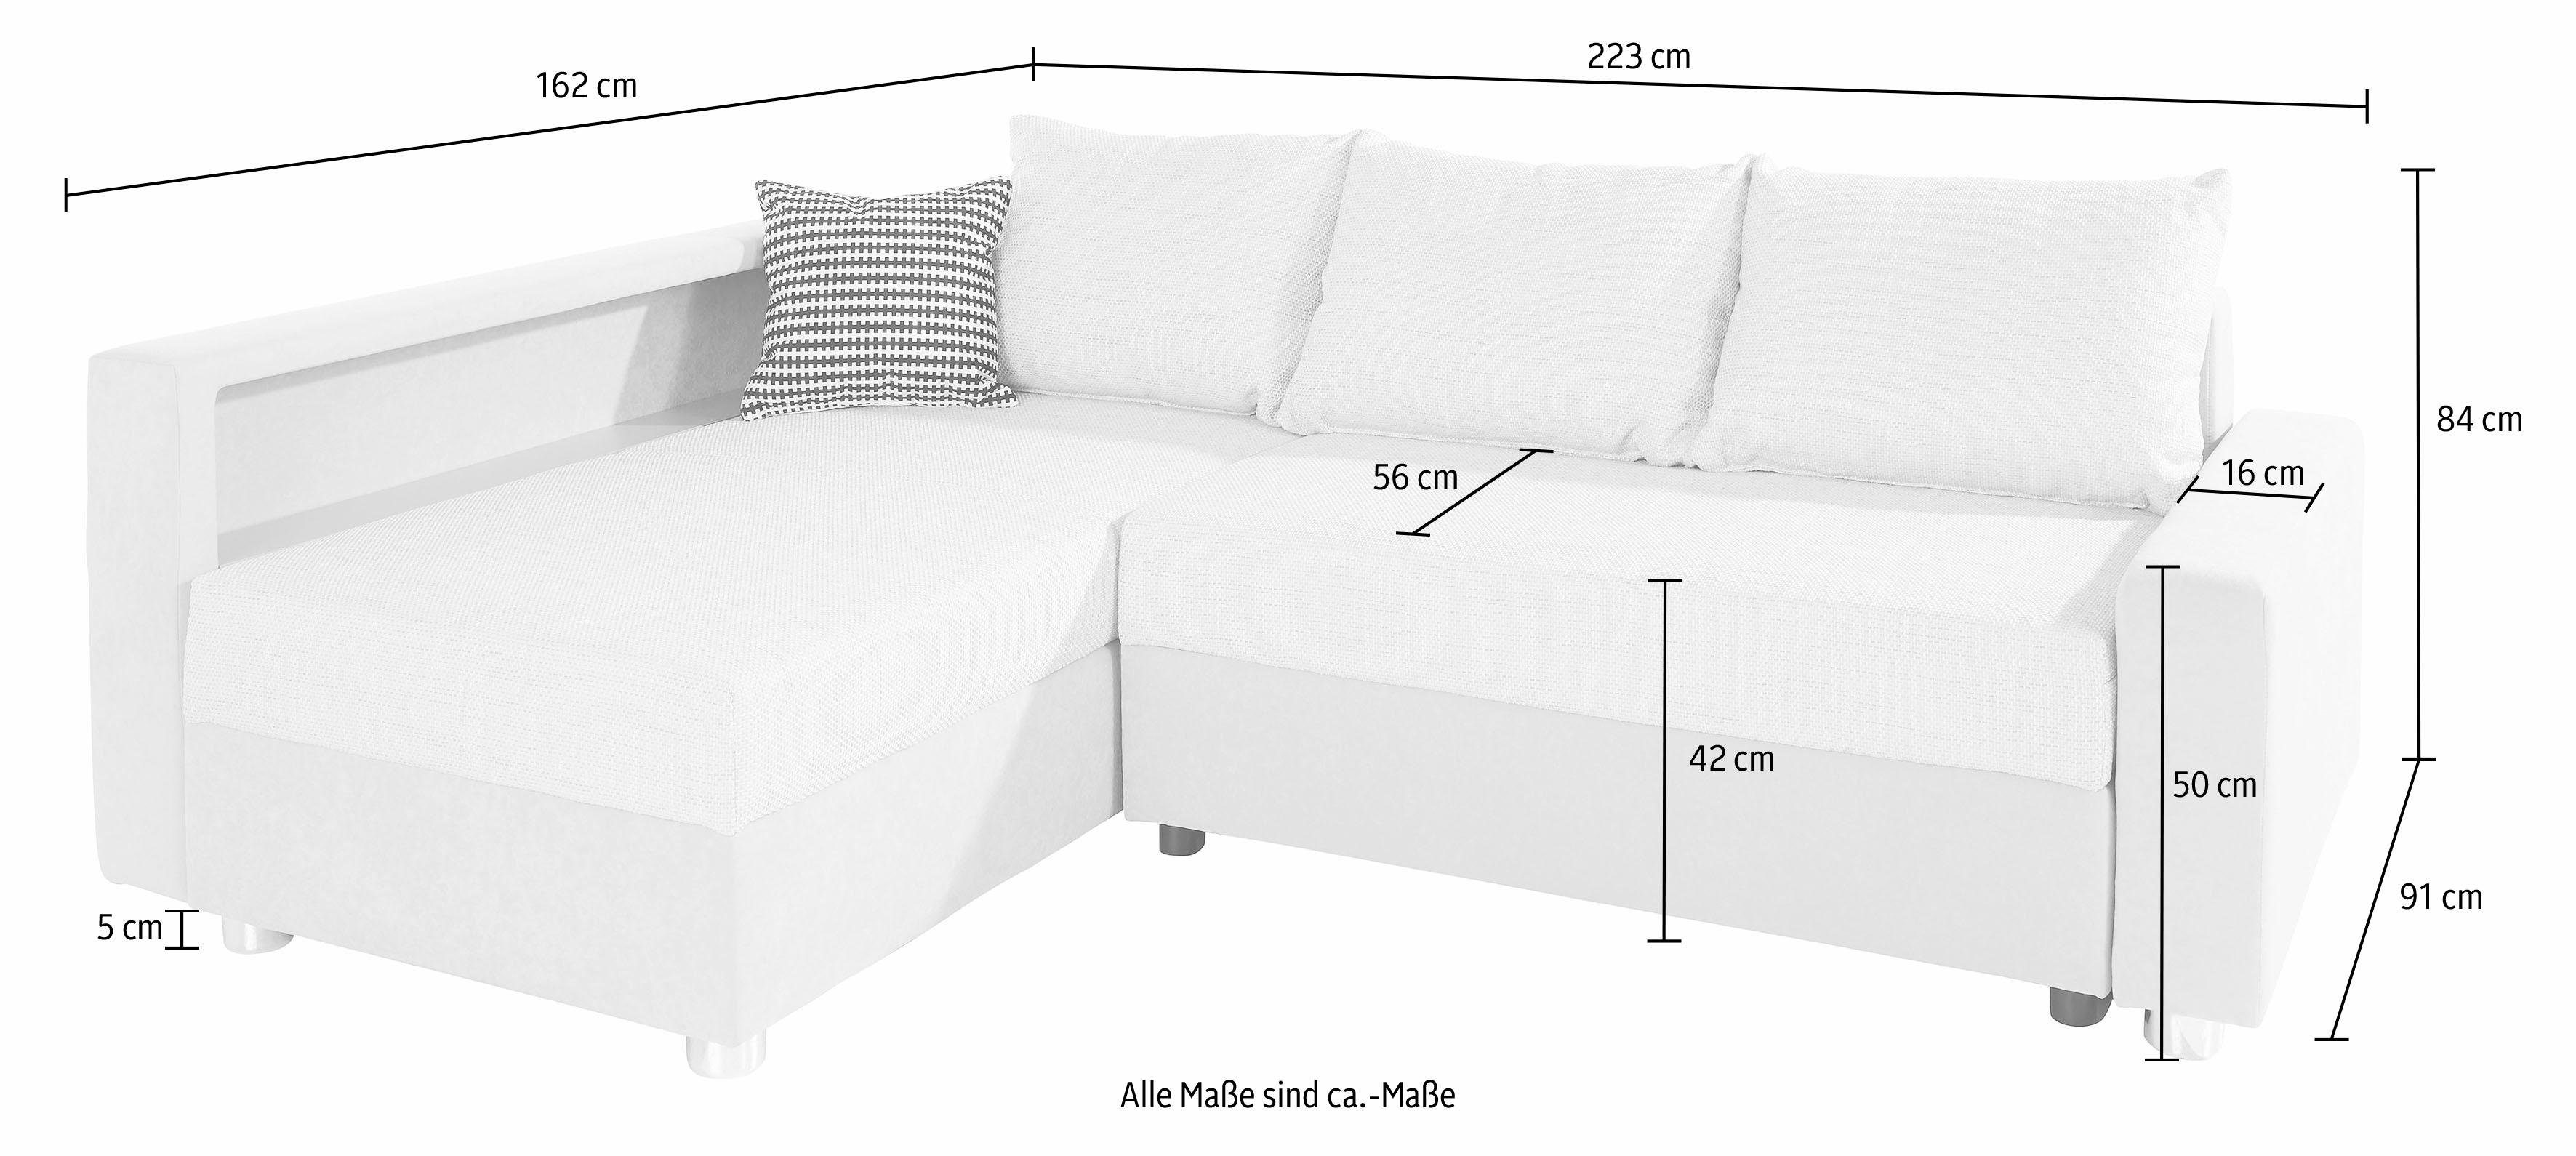 wahlweise Federkern, Ecksofa AB inklusive mit Relax, RGB-LED-Beleuchtung COLLECTION Bettfunktion,